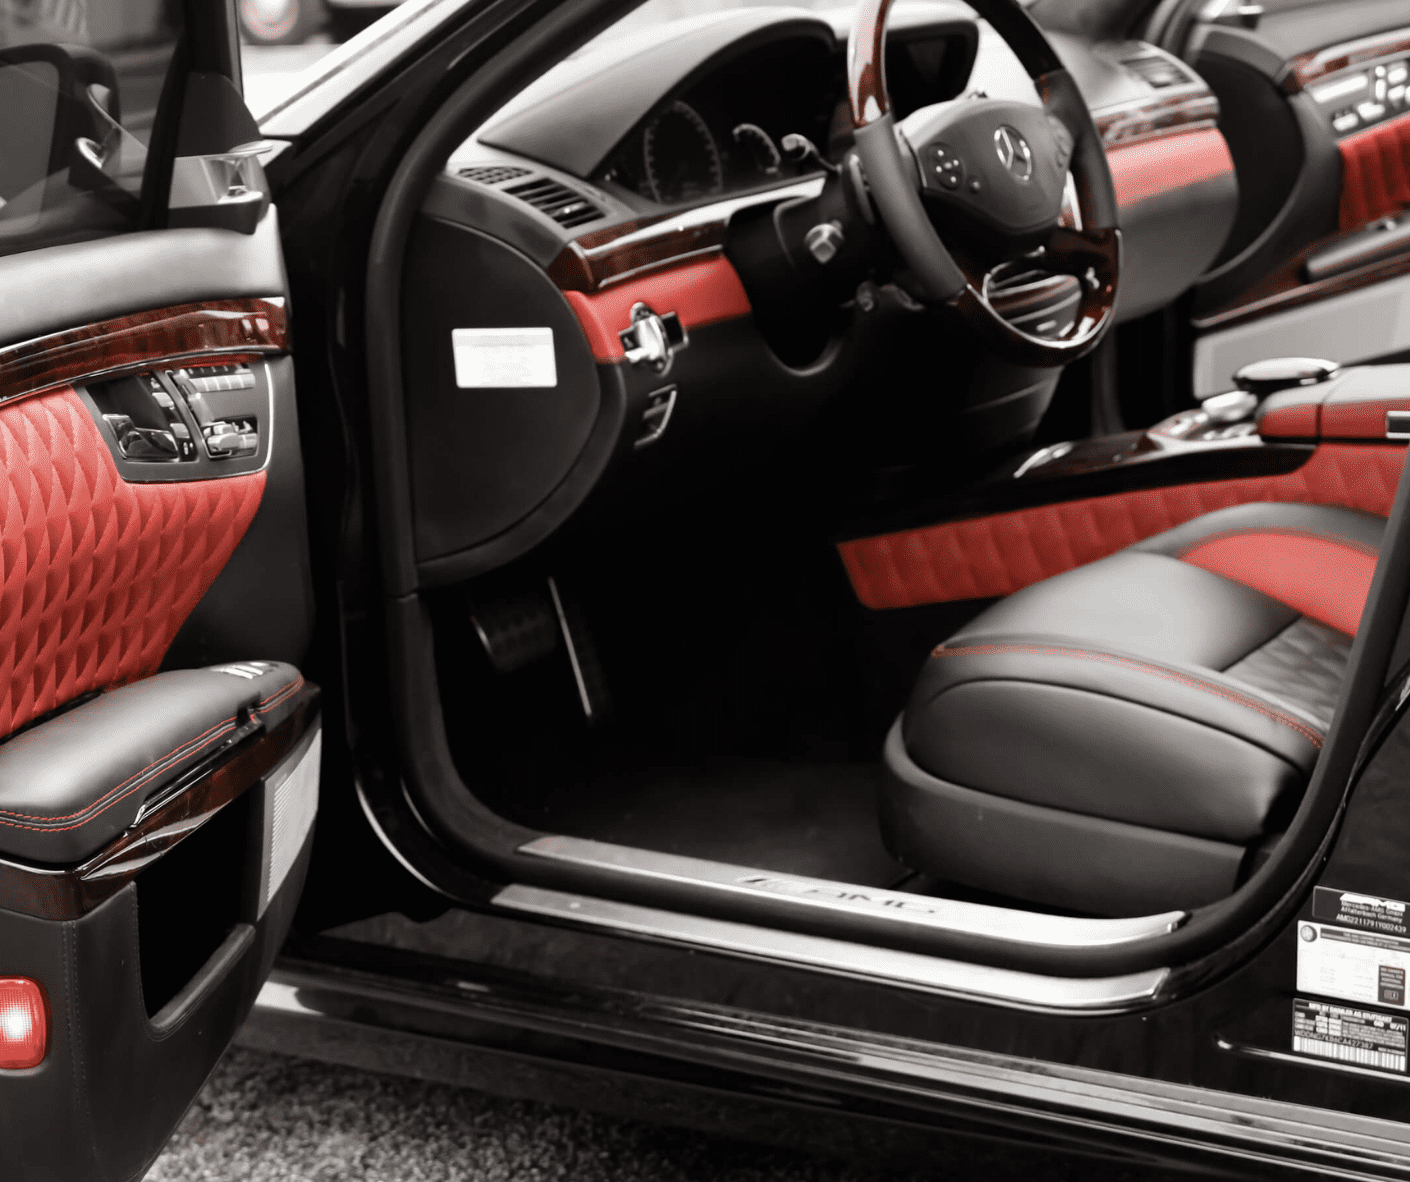 Mercedes full interior reupholstery in black and red leather